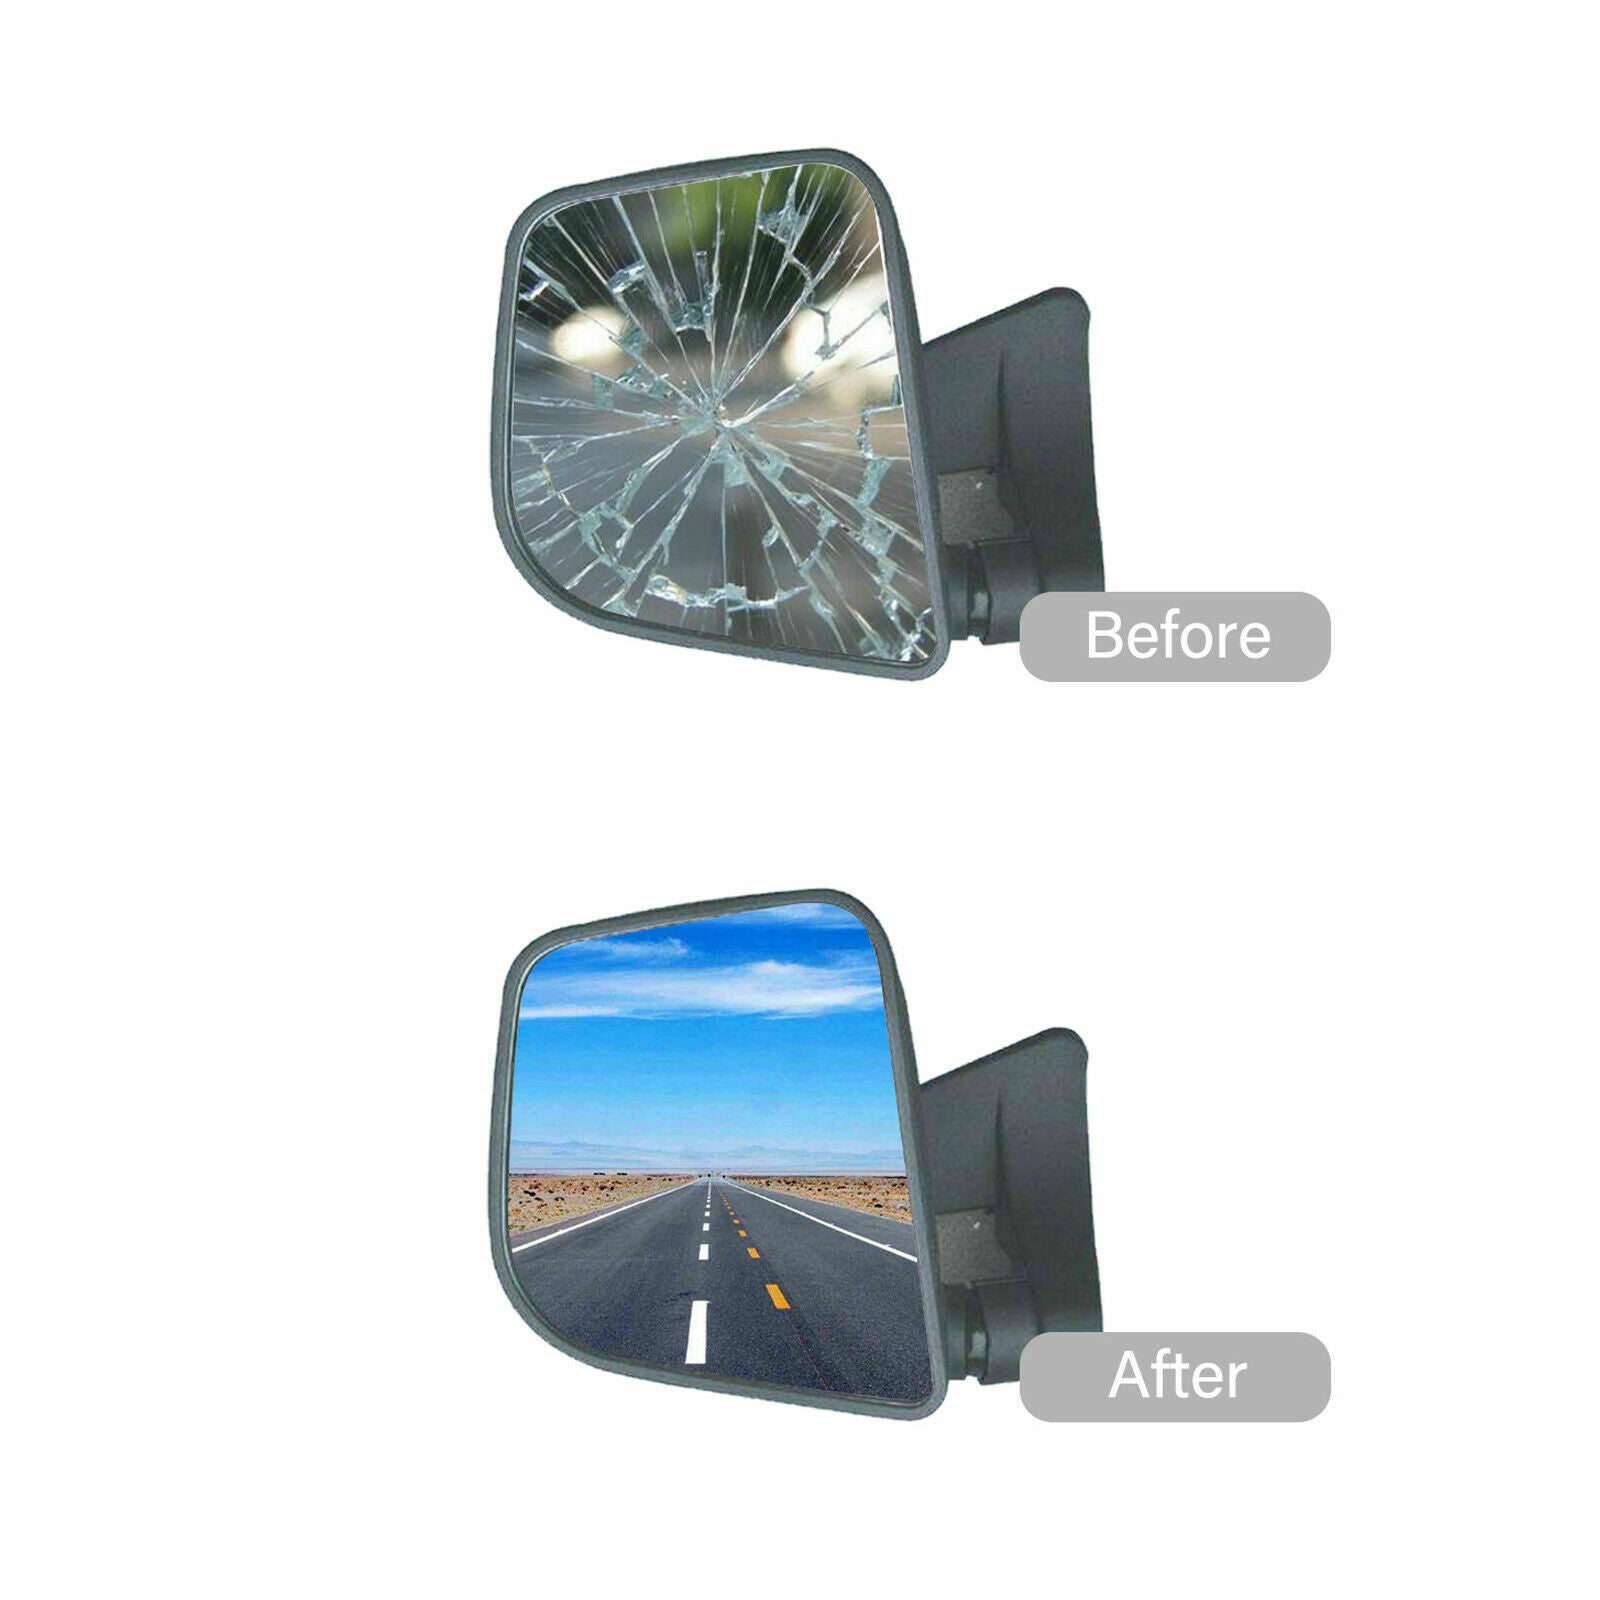 WLLW Upper Towing Mirror Glass Replacement for 2004-2014 Ford F150 Full Size/2006-2008 Lincoln Mark LT Pickup, Driver Left Side LH/Passenger Right Side RH/The Both Sides Flat M-0016